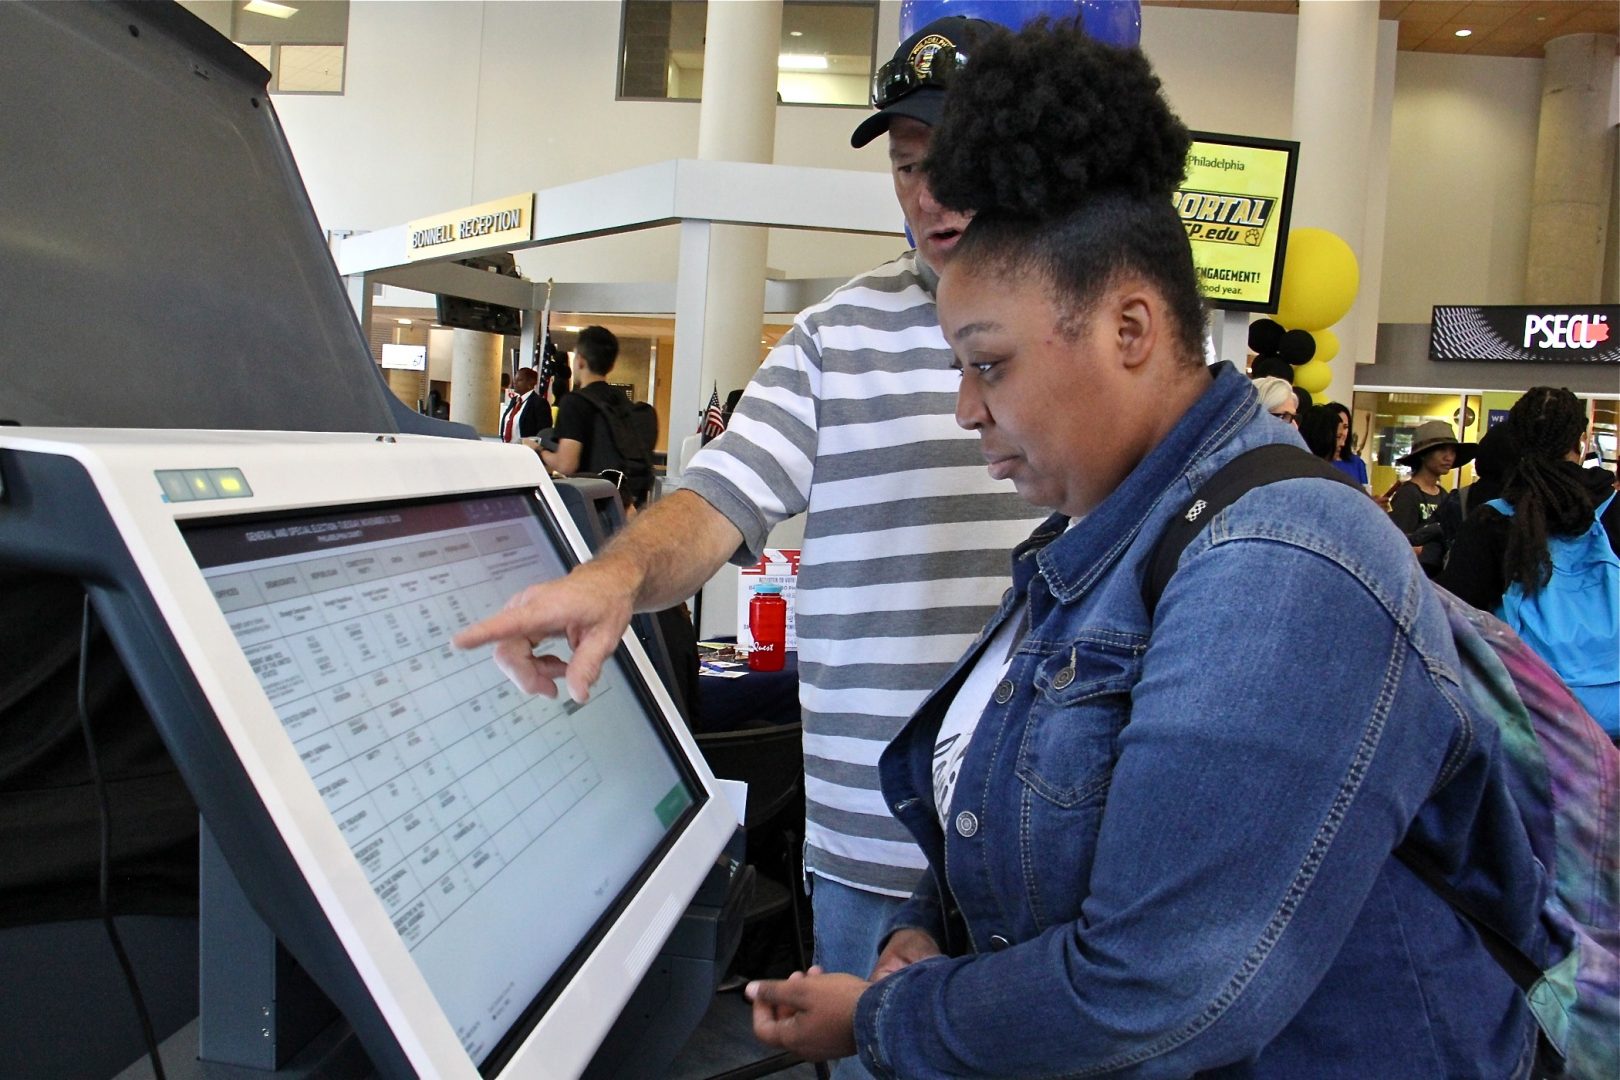 Community College of Philadelphia student Hanna Archibald, 20, learns how to use a new voting machine from Matthew McKeon of the City Commissioners Office.